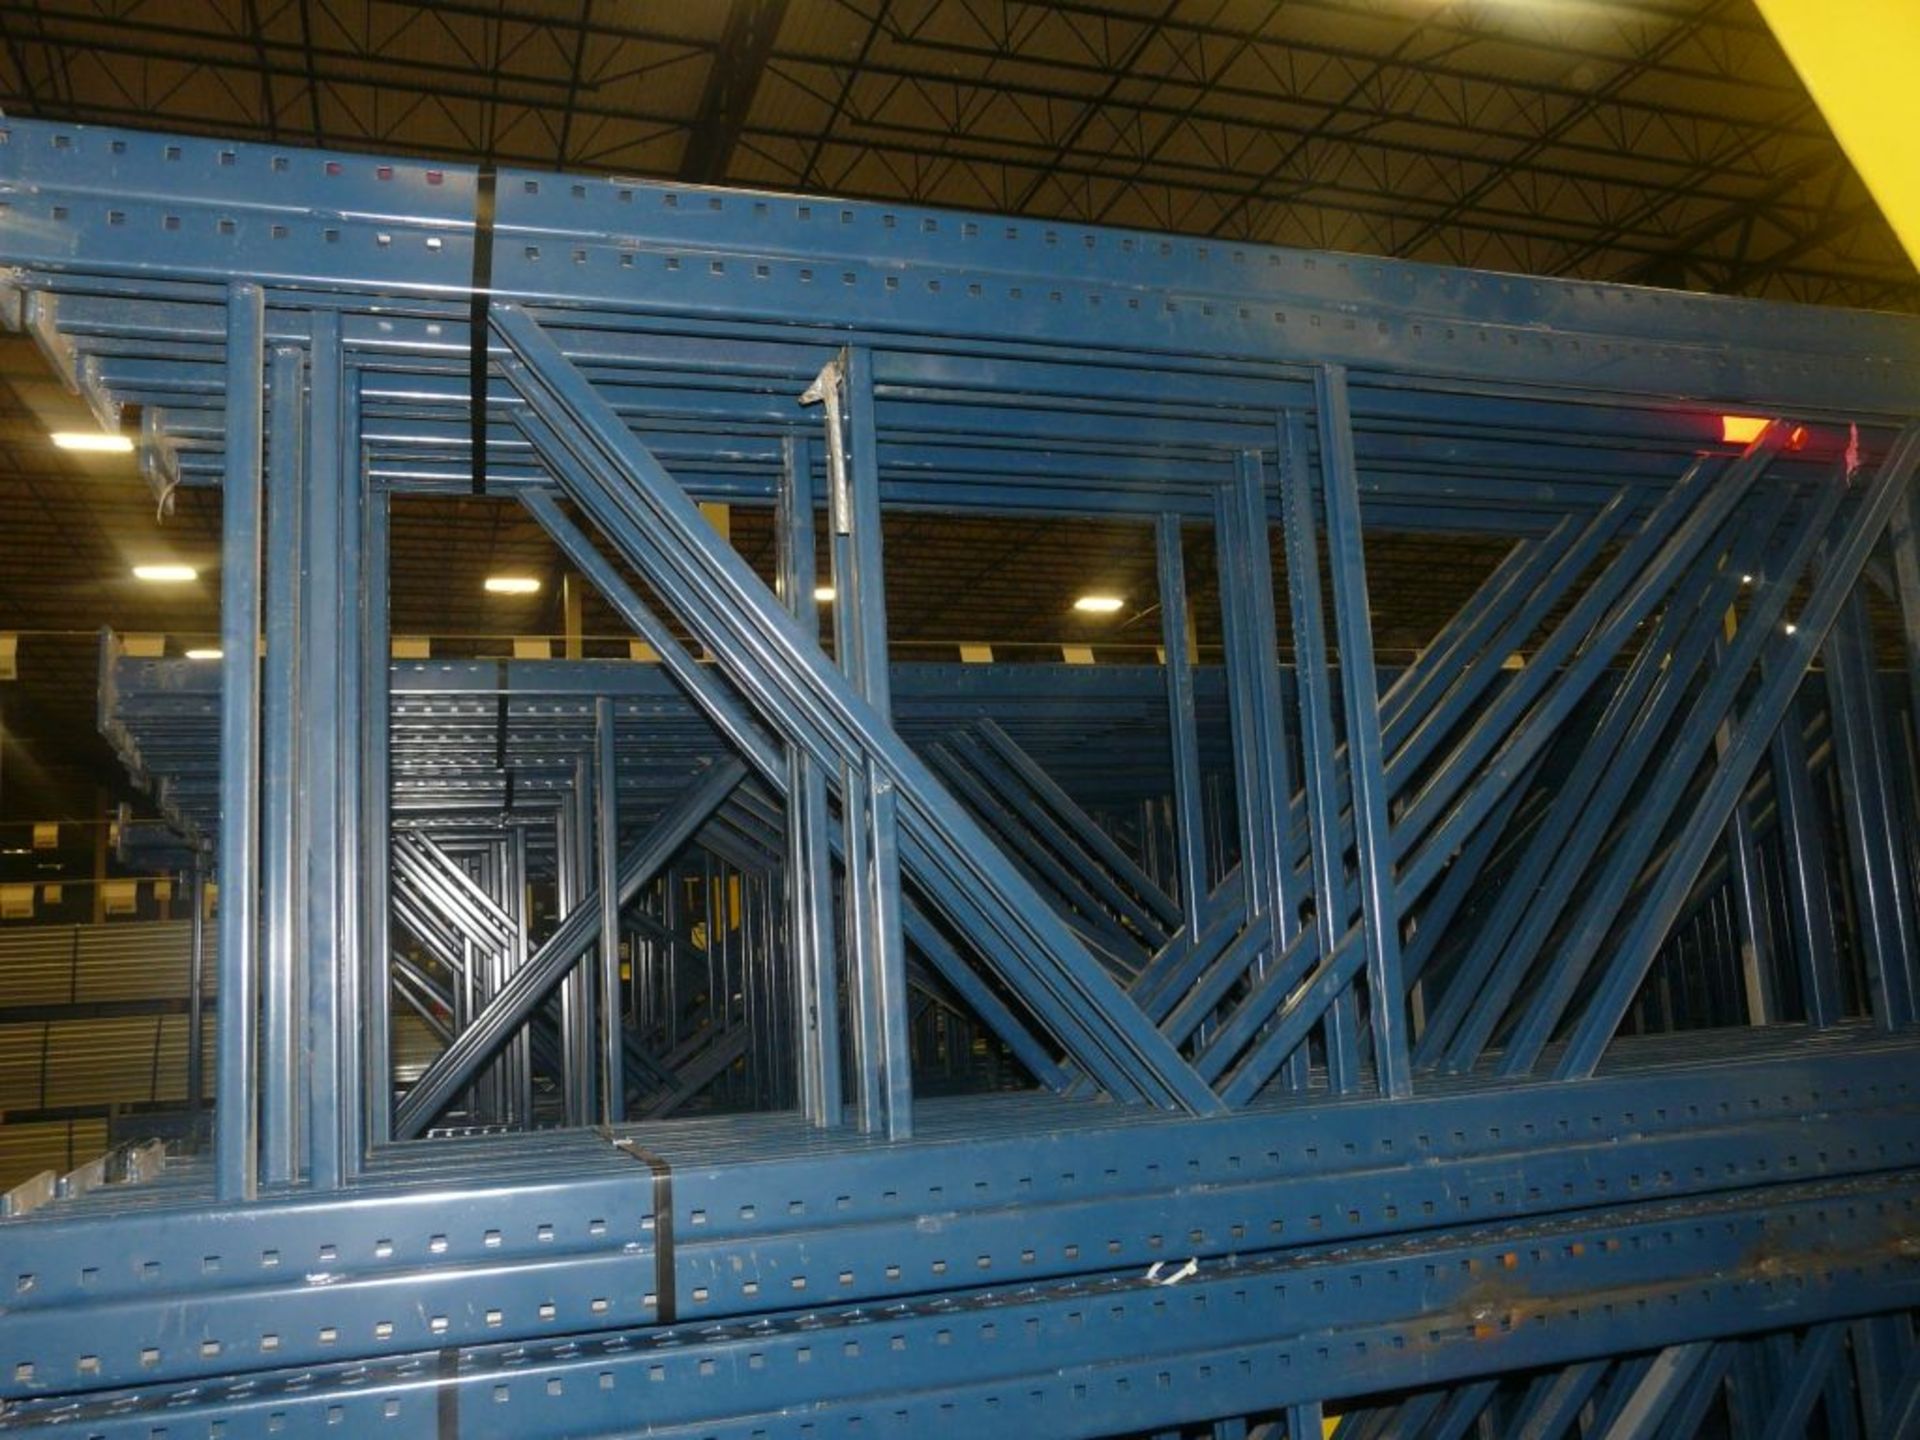 Lot of (10) 29'H x 42"W Double Column Uprights with 11' Second Column - Tag: 224093 - $30 Lot - Image 3 of 3